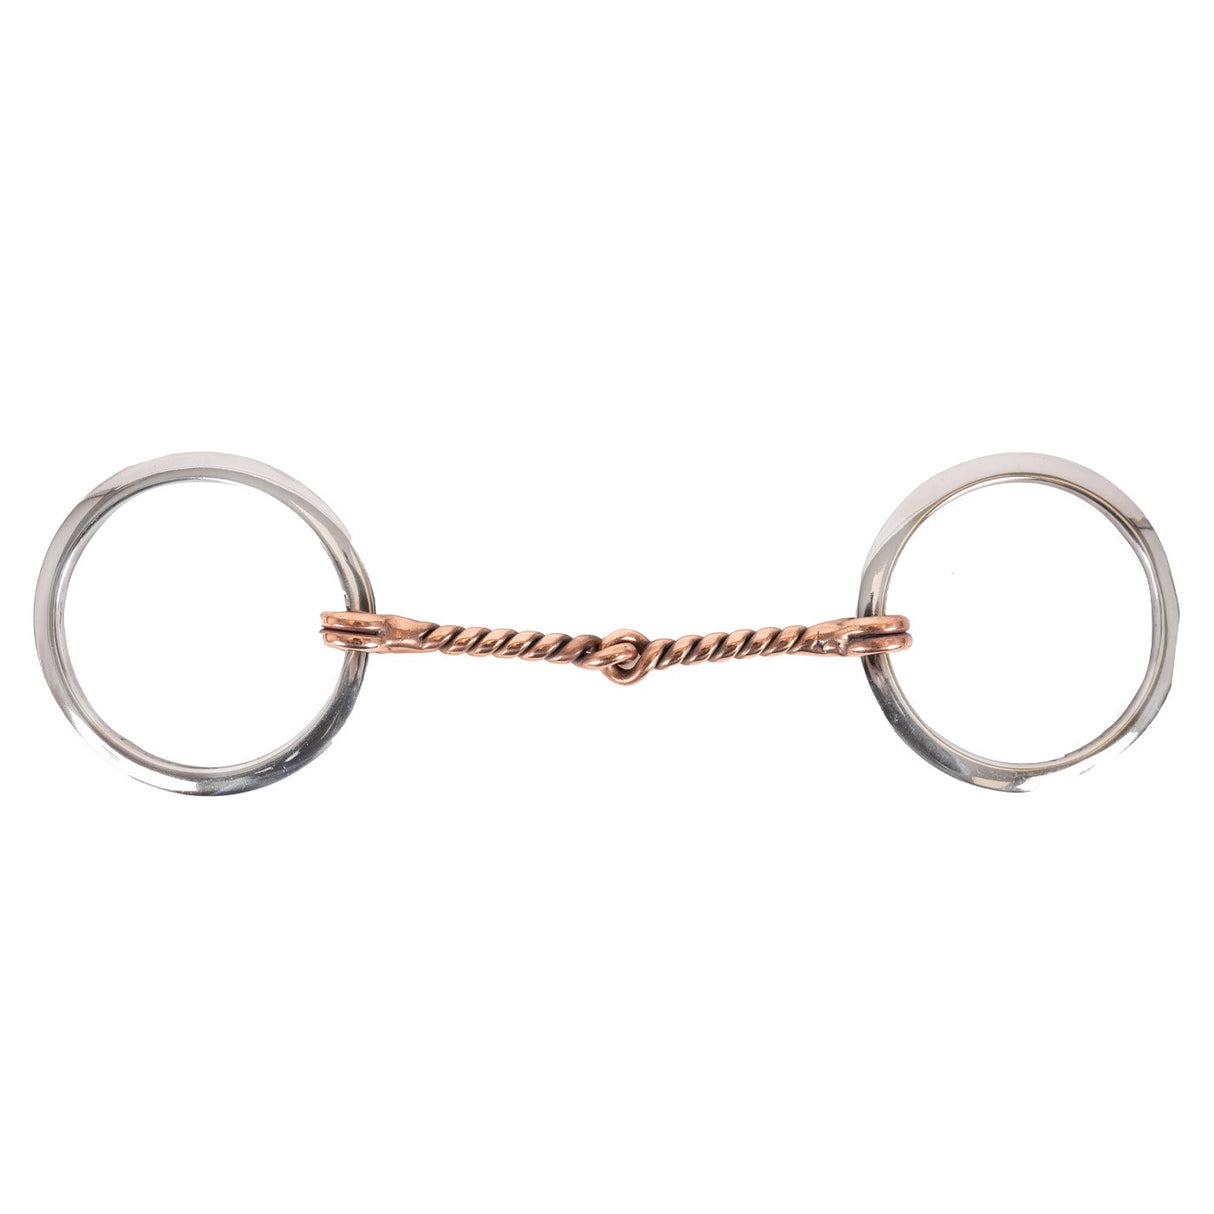 EvoEq Flat Ring Copper Twisted Mouth Bit